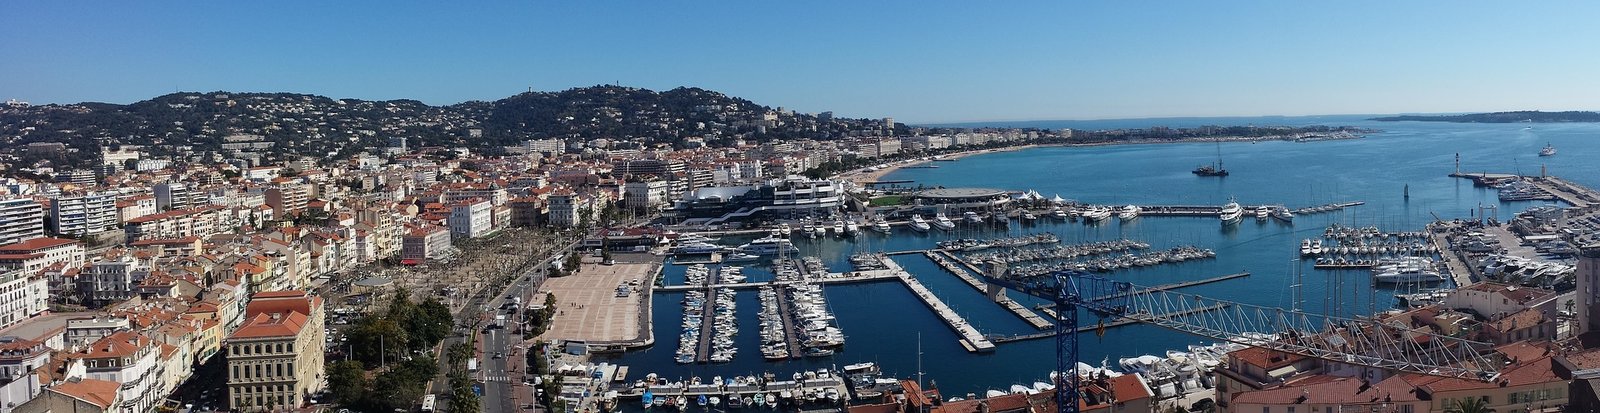 Cannes festival & the French Riviera